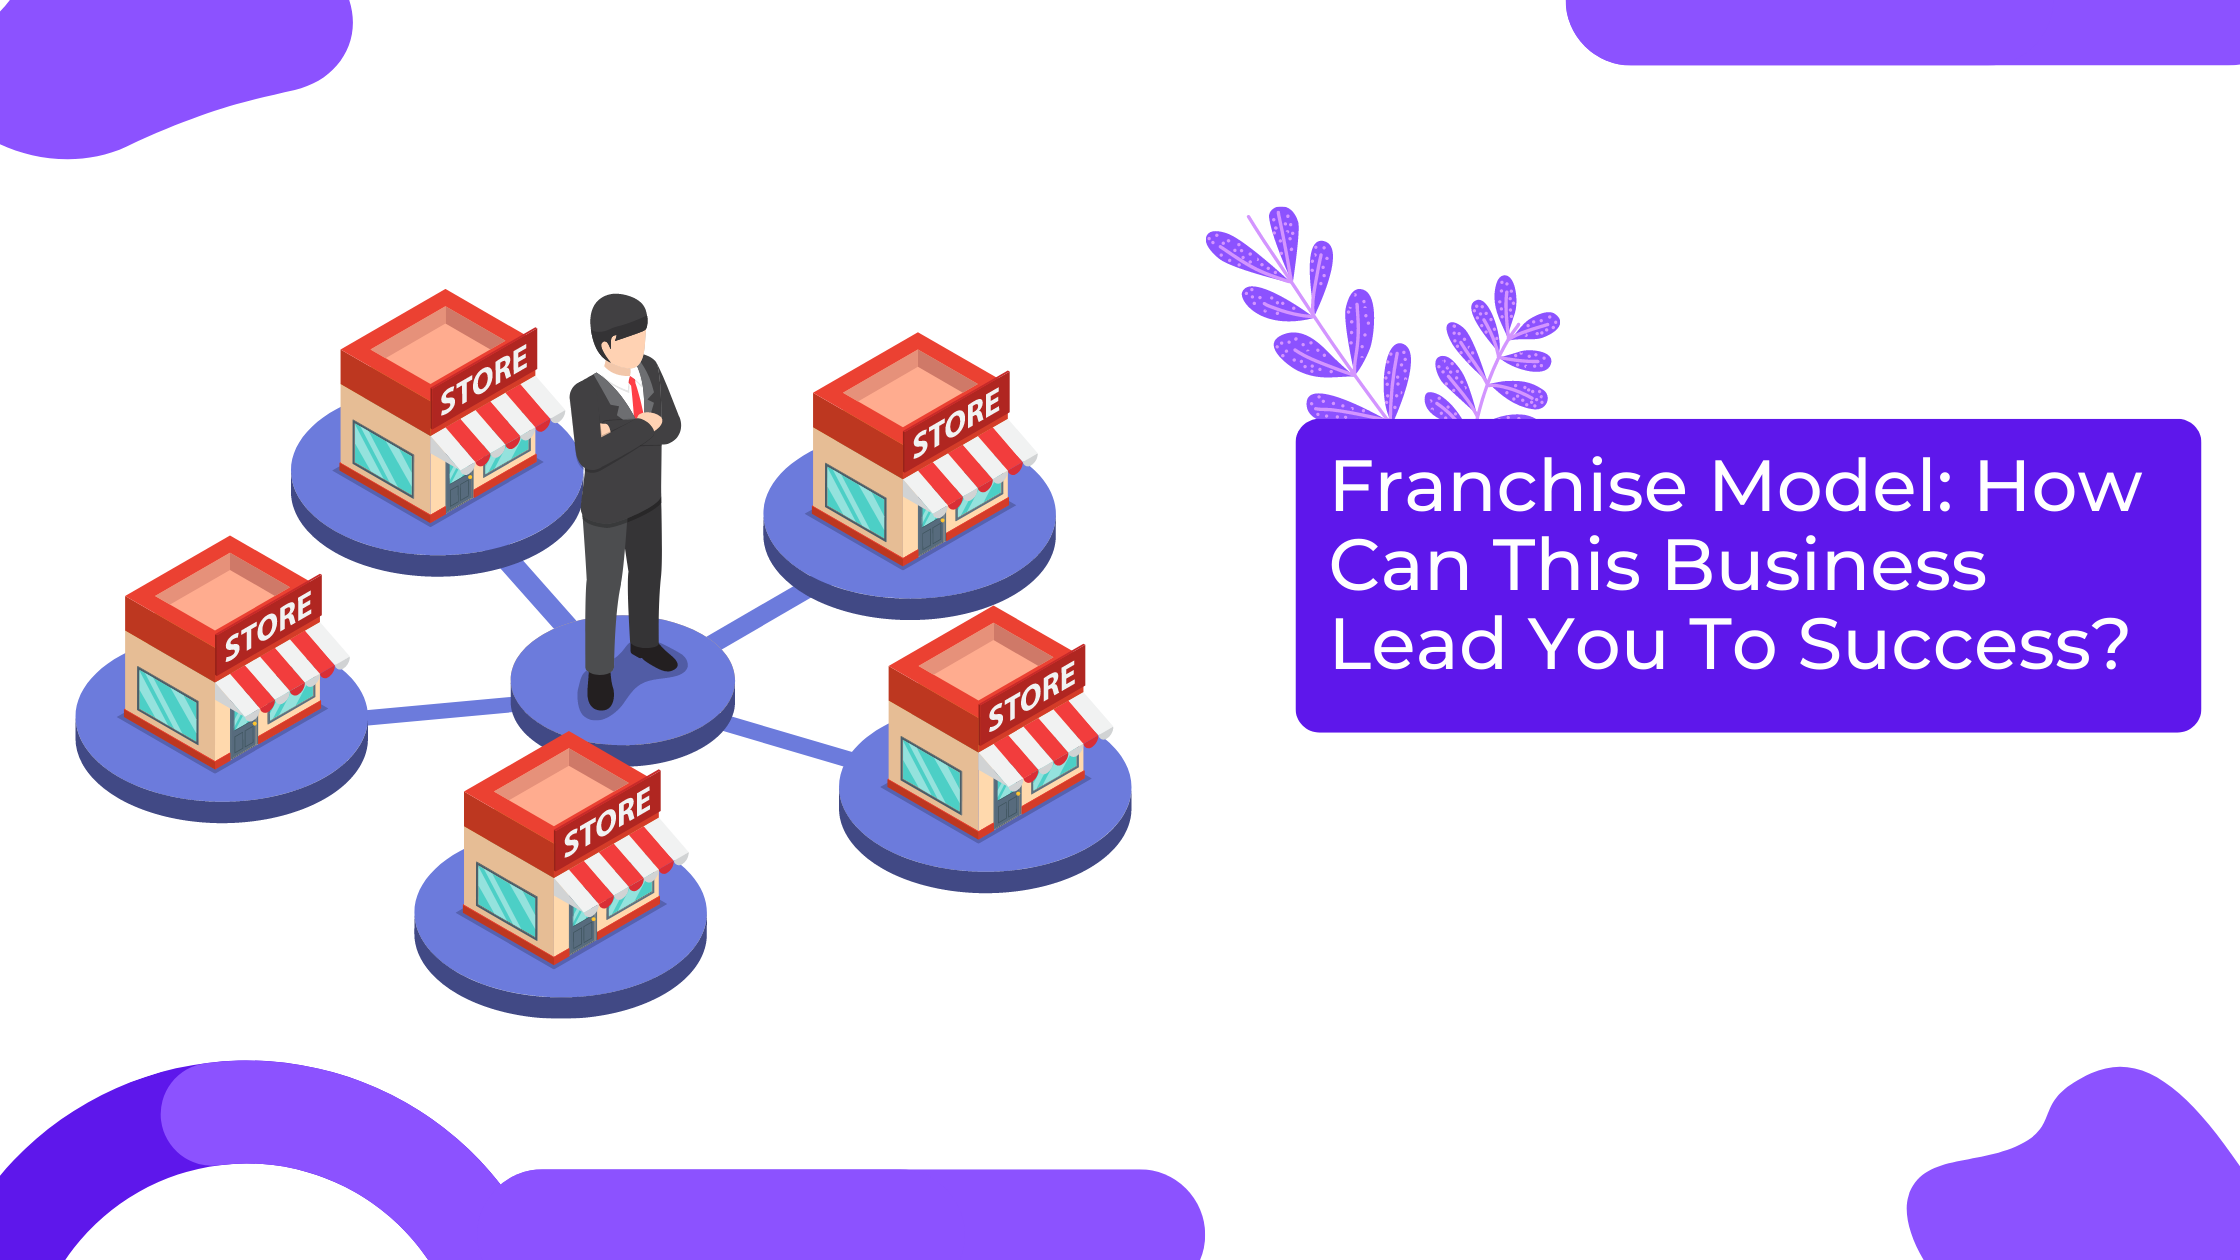 Franchise Model: How Can This Business Lead You To Success?